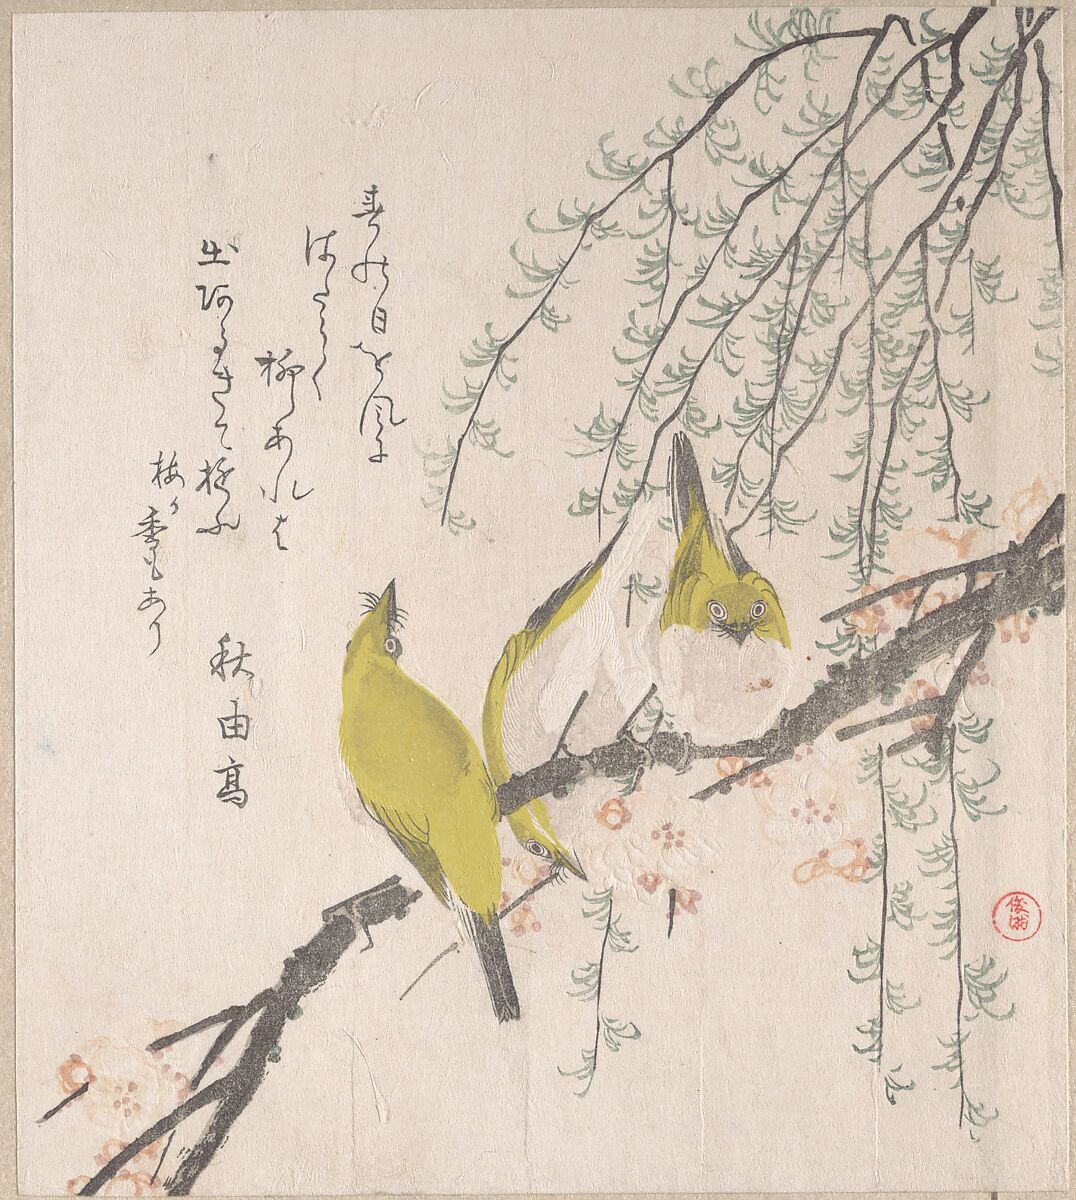 Japanese White-eyes with Plum Tree and Willow, from Spring Rain Surimono Album (Harusame surimono-jō, vol. 3), Kubo Shunman (Japanese, 1757–1820) (?), Privately published woodblock prints (surimono) mounted in an album; ink and color on paper, Japan 